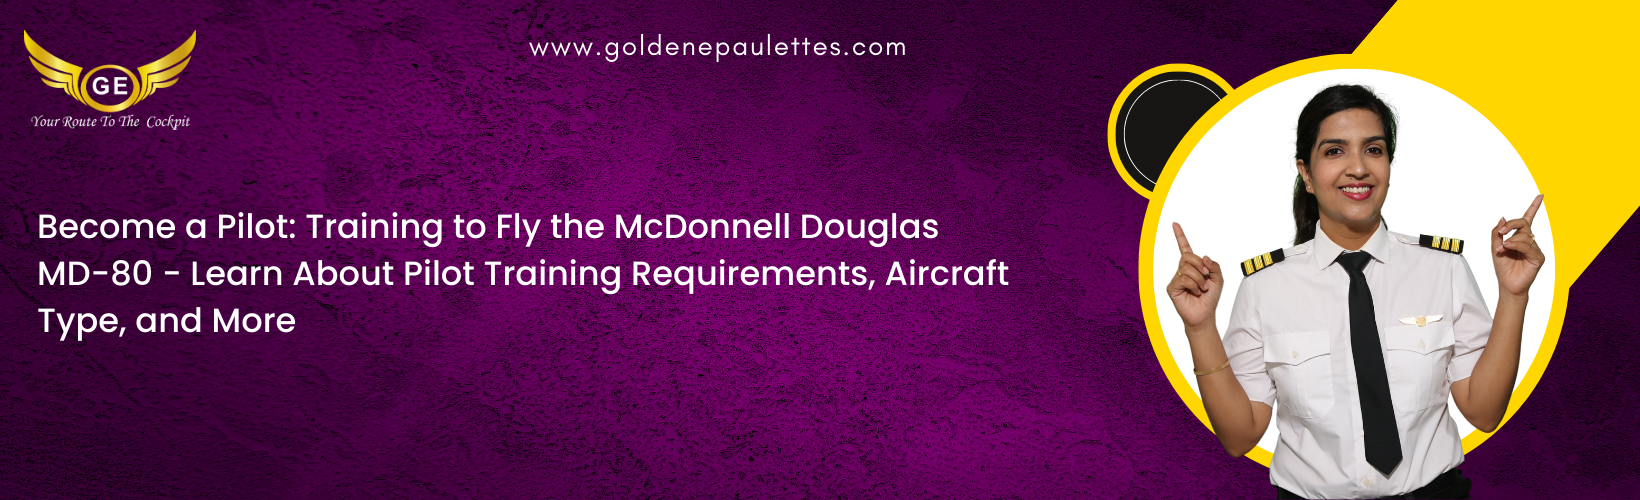 Training to Fly the McDonnell Douglas MD